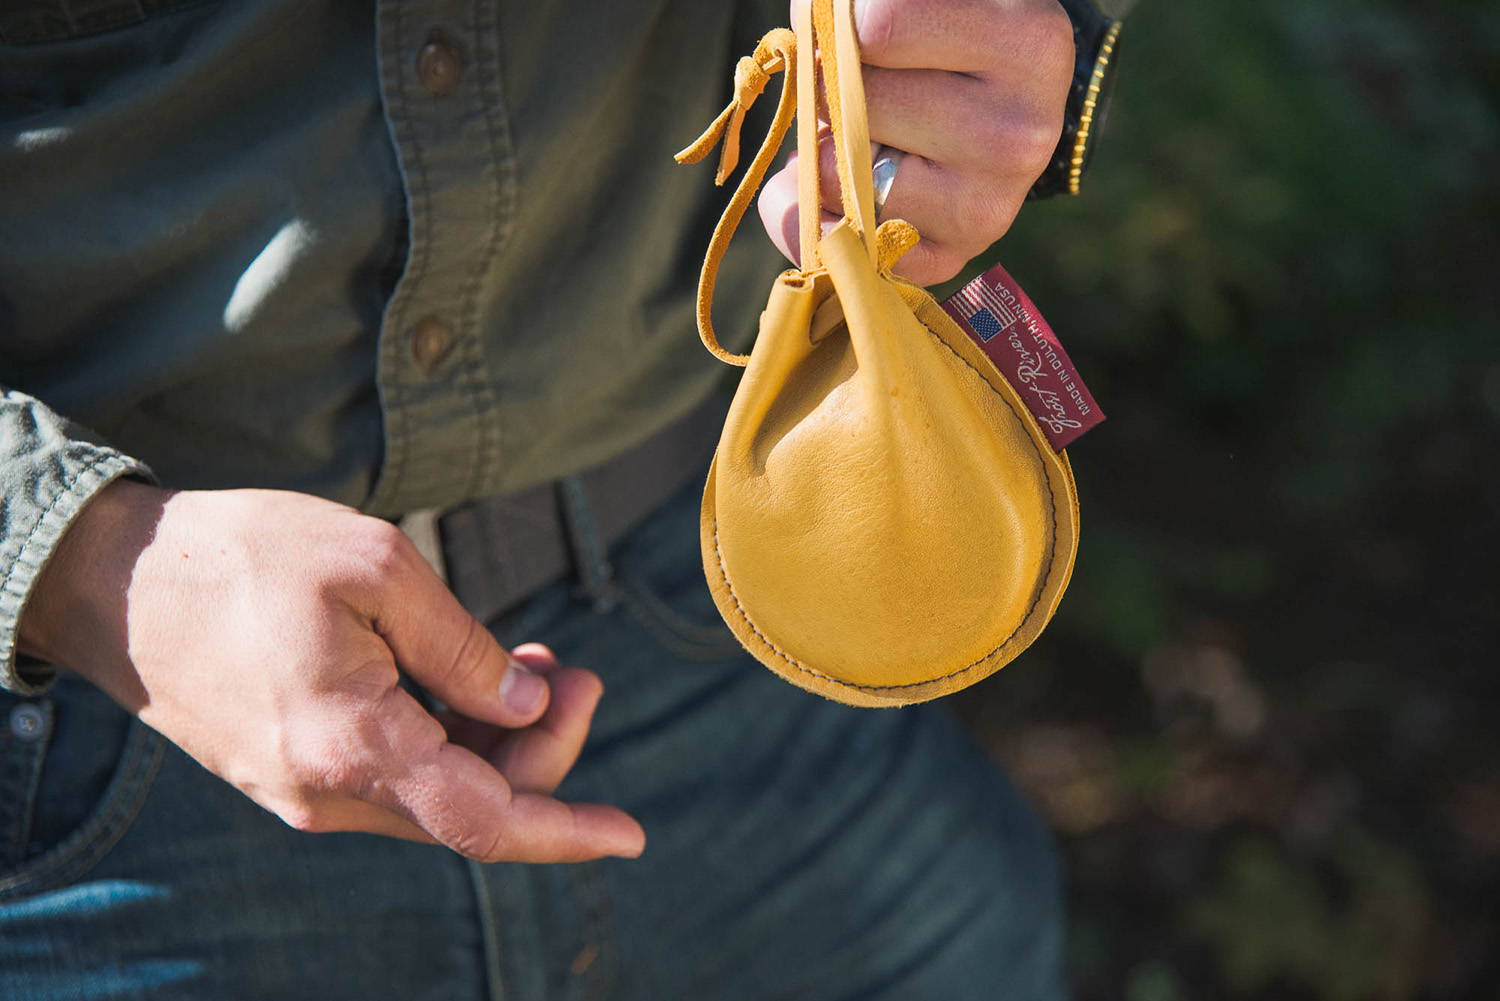 Small Leather Draw String Pouch